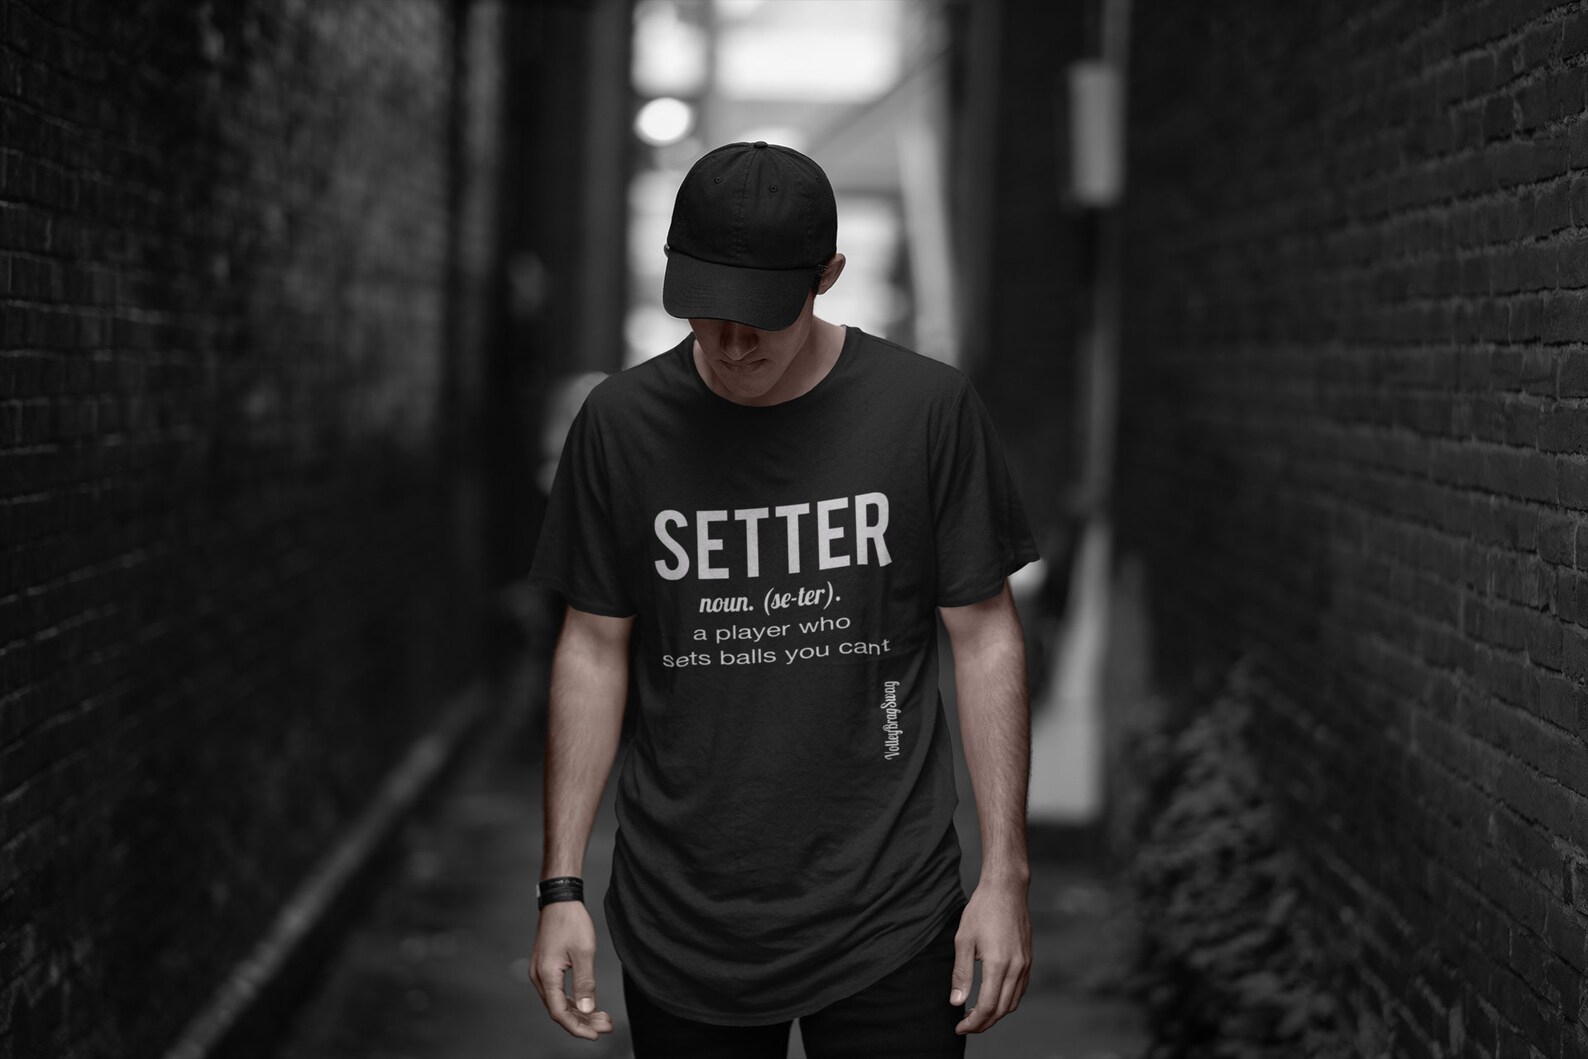 "SETTER A Player Who Sets Balls You Cant" are one of the 6 best selling volleyball setting quotes on setter shirts on Etsy.